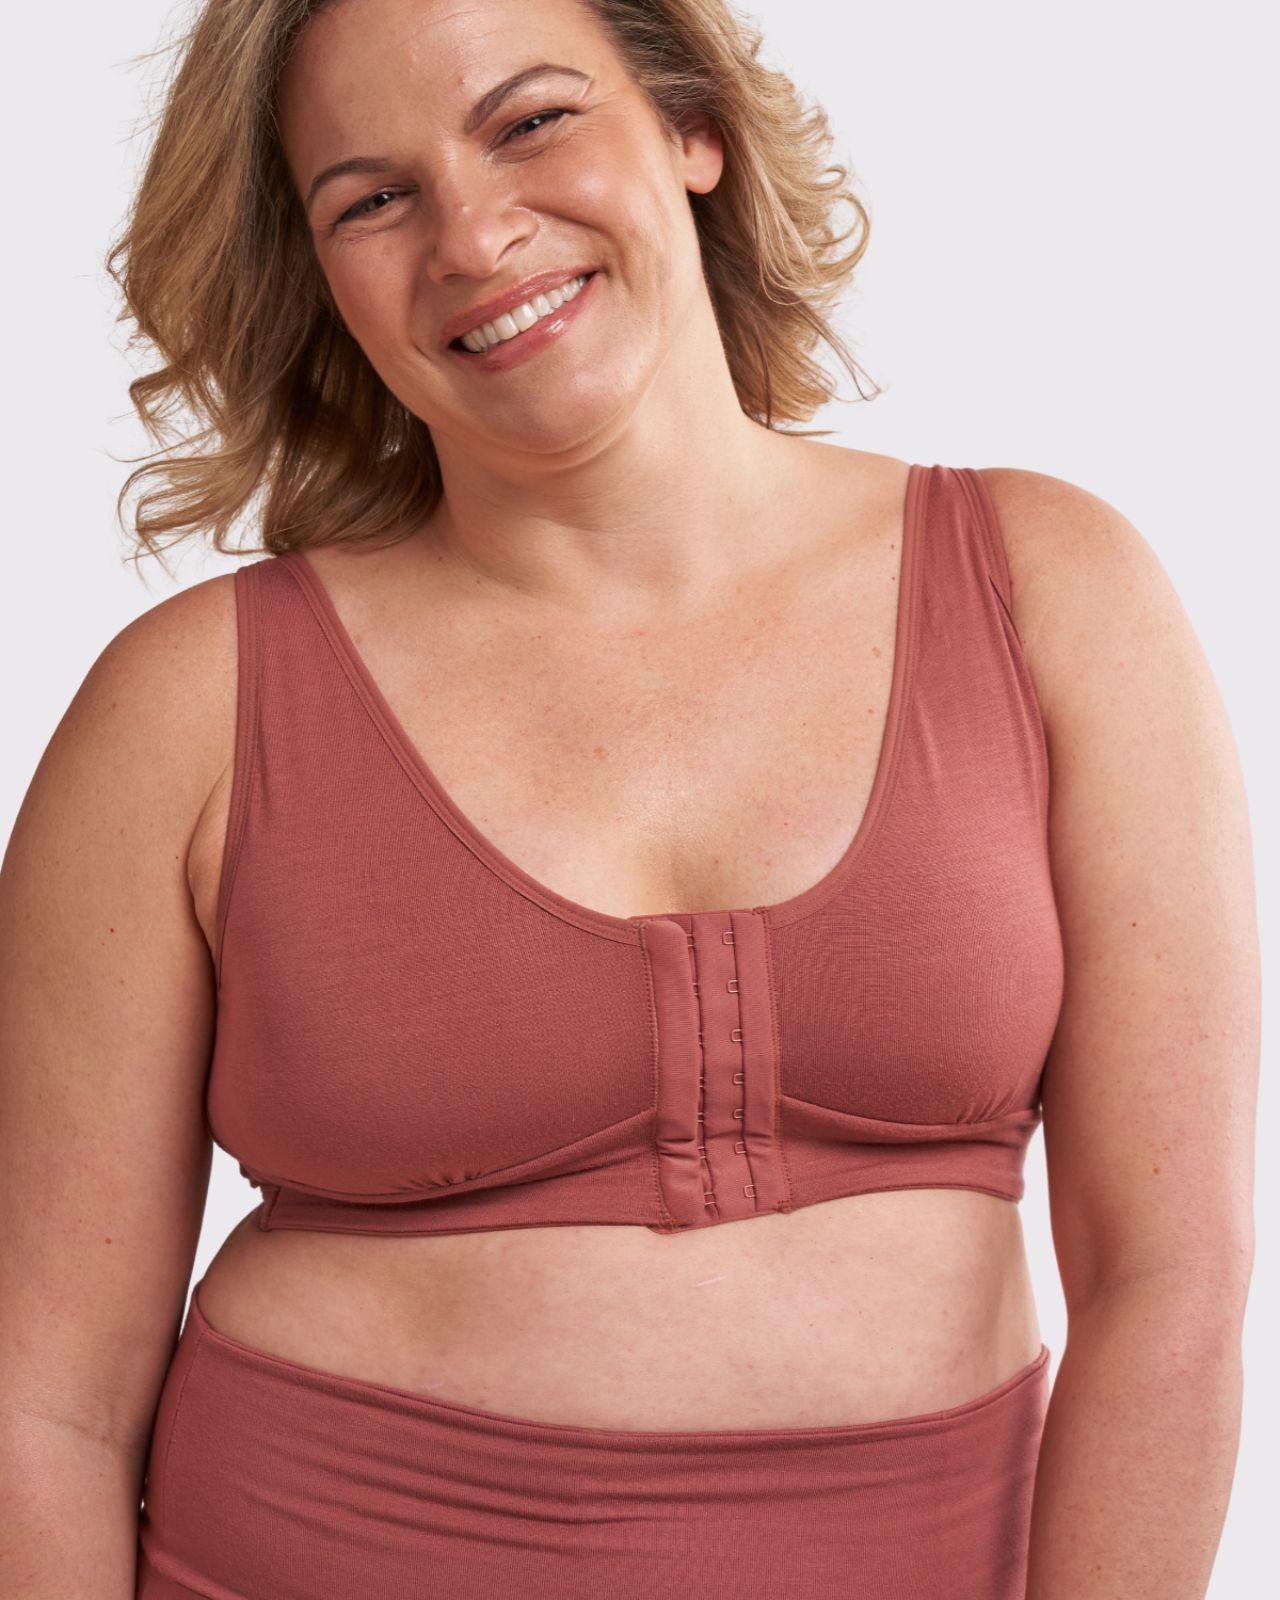 Rora Pocketed Front Closure Bra Bra in Dusty Rose By AnaOno - XS-3X